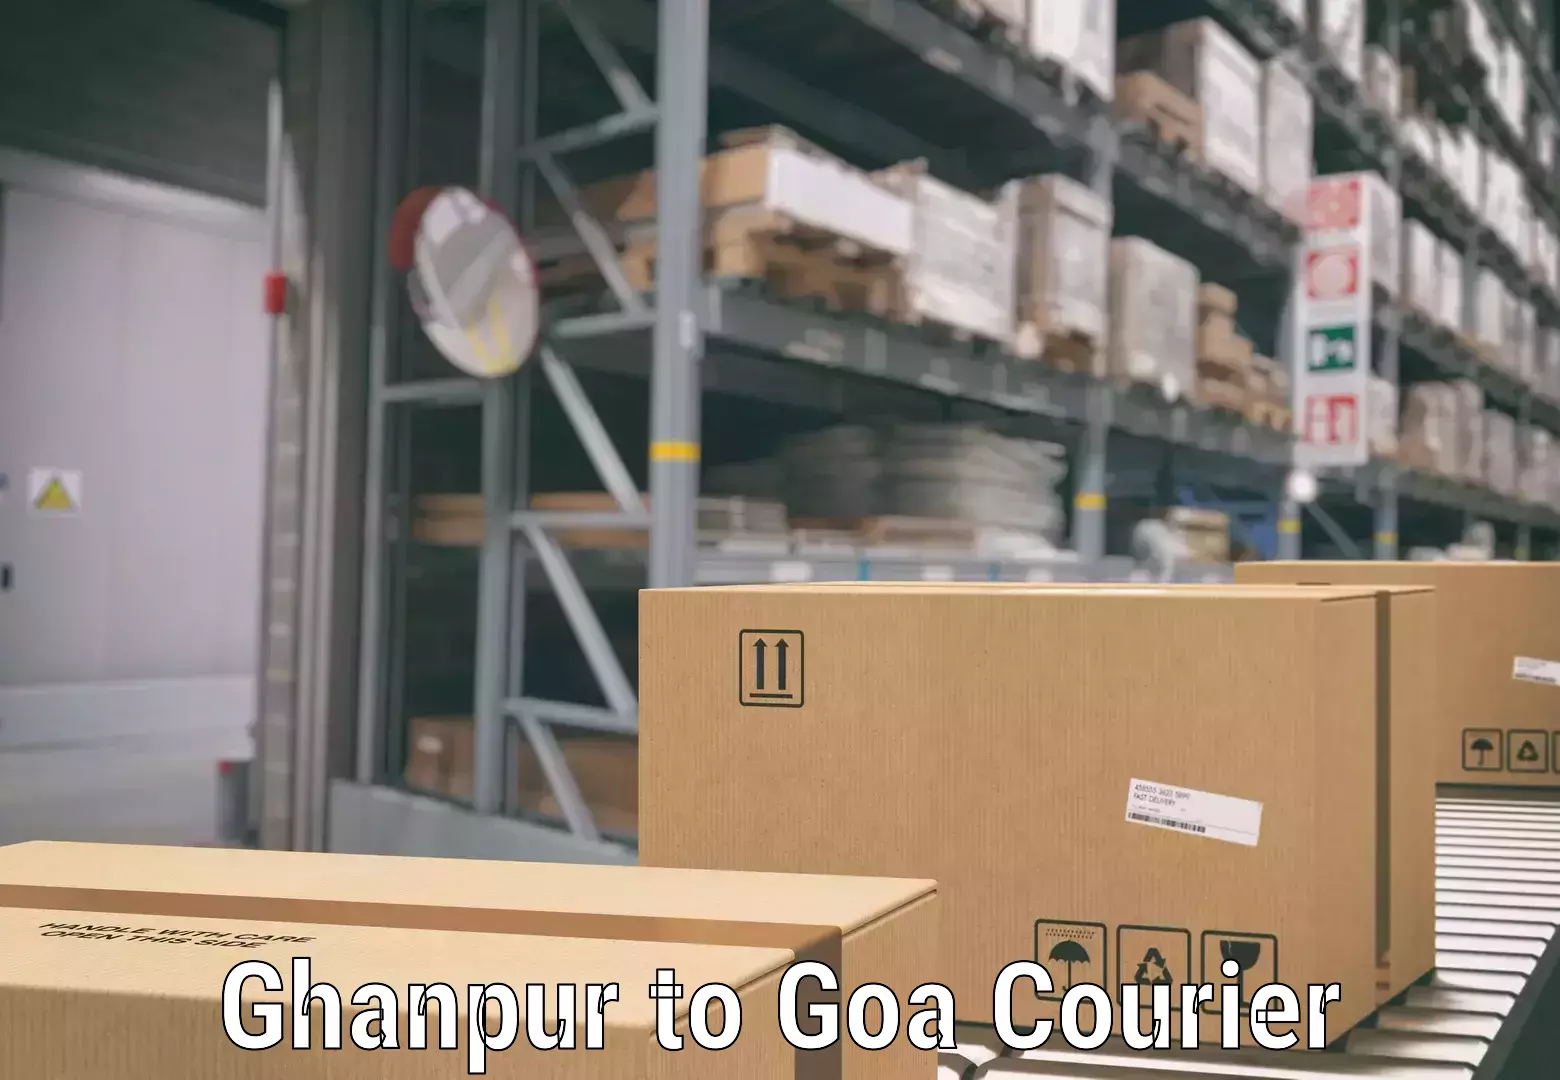 Luggage transport service Ghanpur to Goa